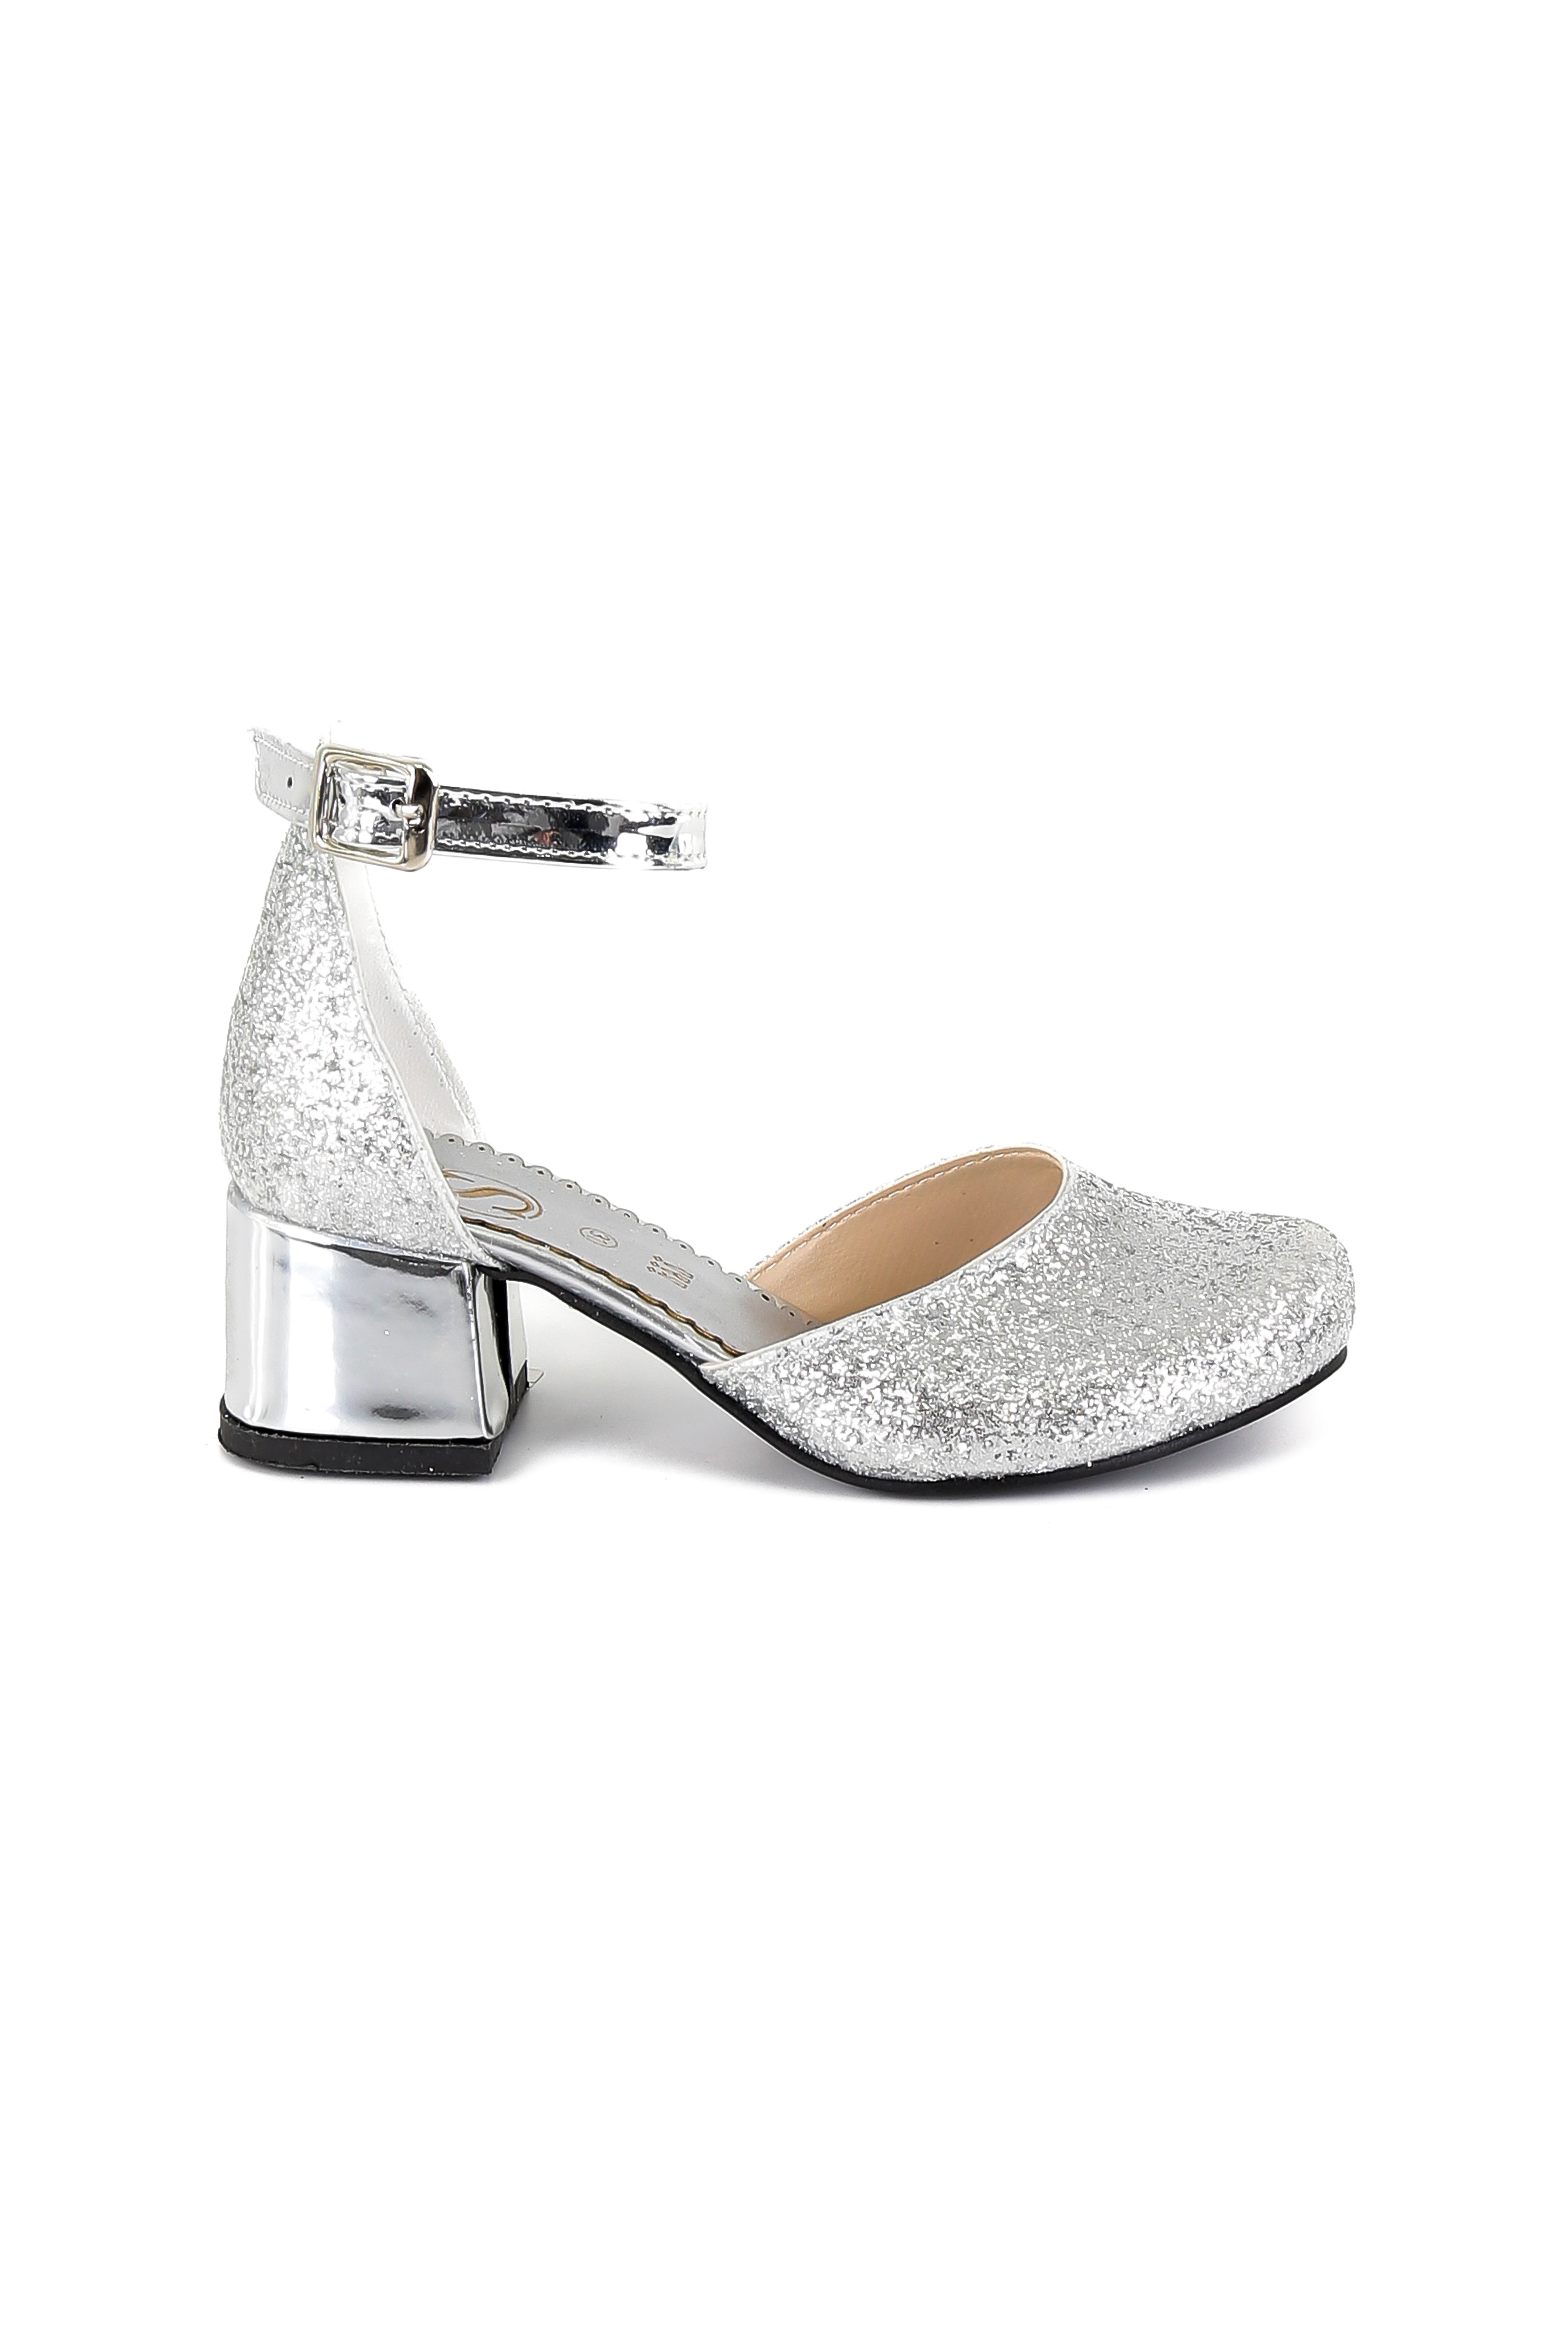 Girls Glittery Mary Janes Block Heel Silver Shoes - Ivory Silver